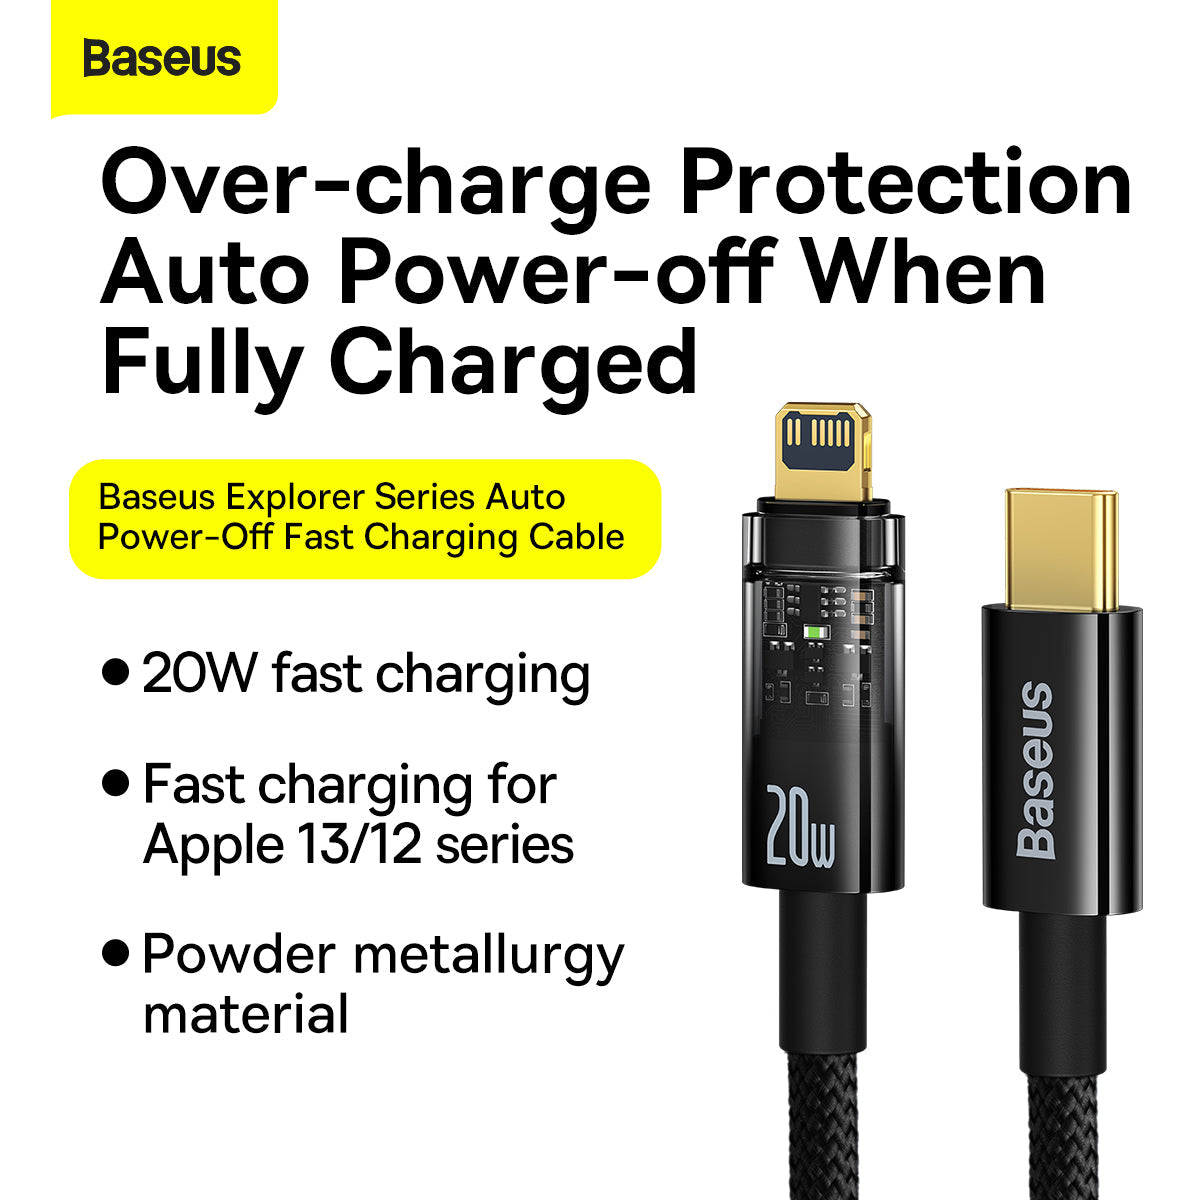 BASEUS EXPLORER SERIES AUTO POWER-OFF FAST CHARGING DATA CABLE TYPE-C TO IPH (20W)(2M) - Black